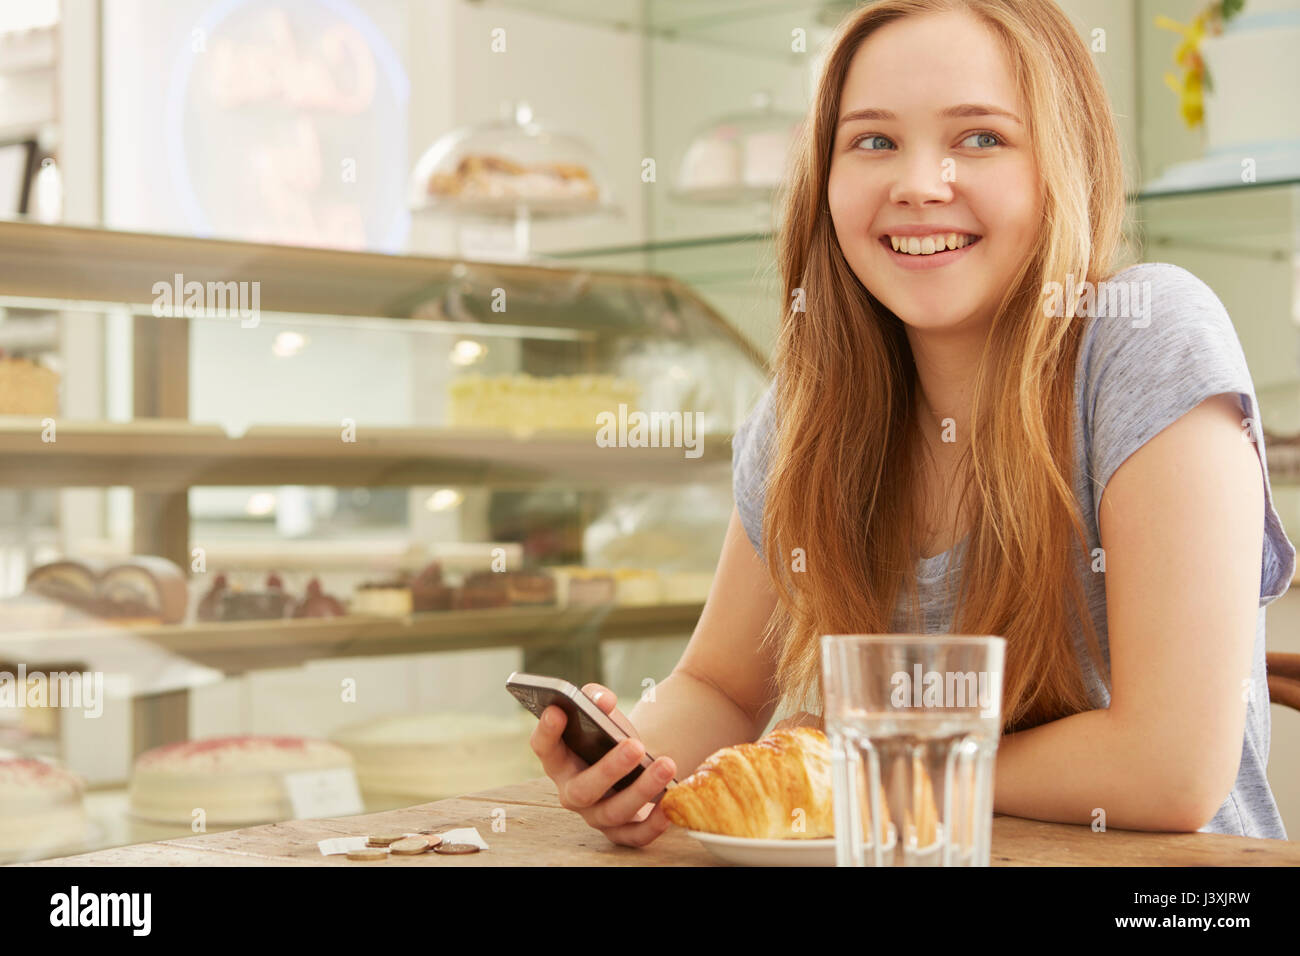 Girl in cafe holding smartphone smiling Stock Photo